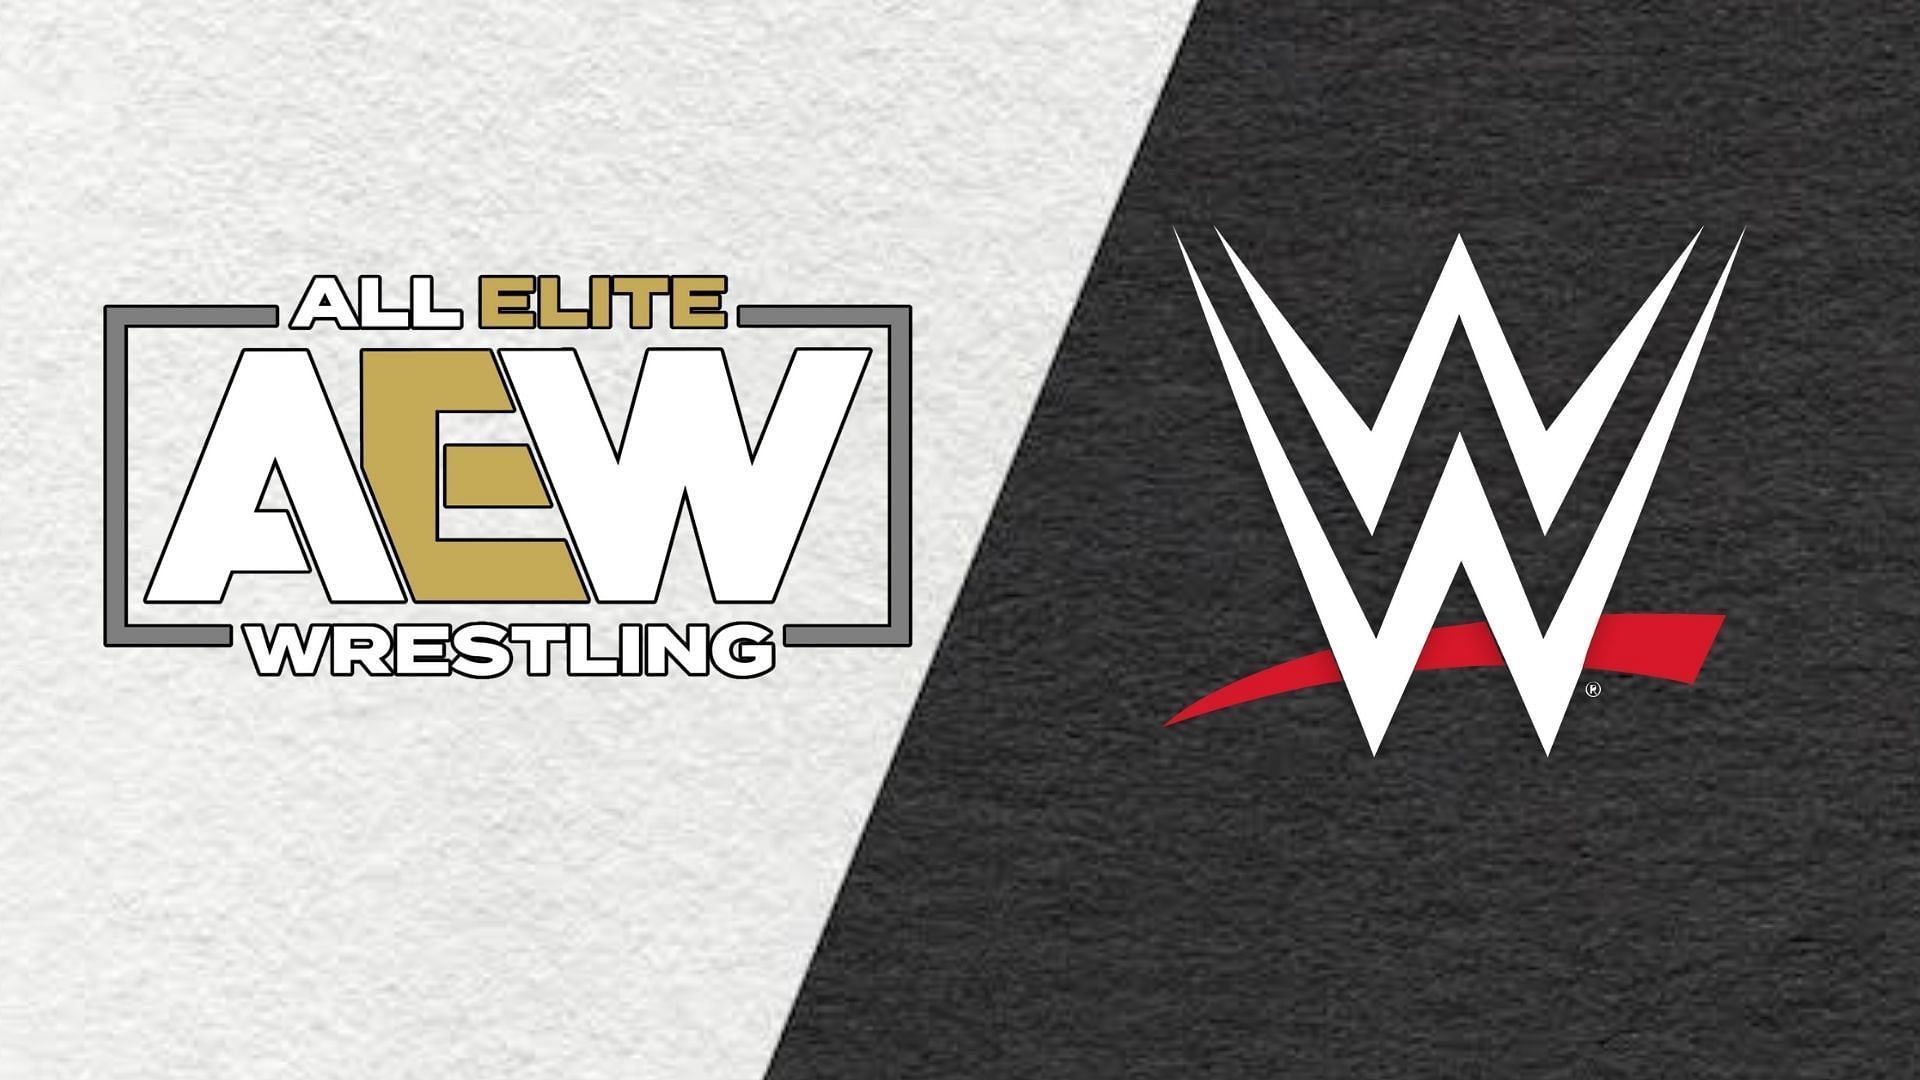 Both AEW and WWE have there eyes set on possibly signing a top prospect.